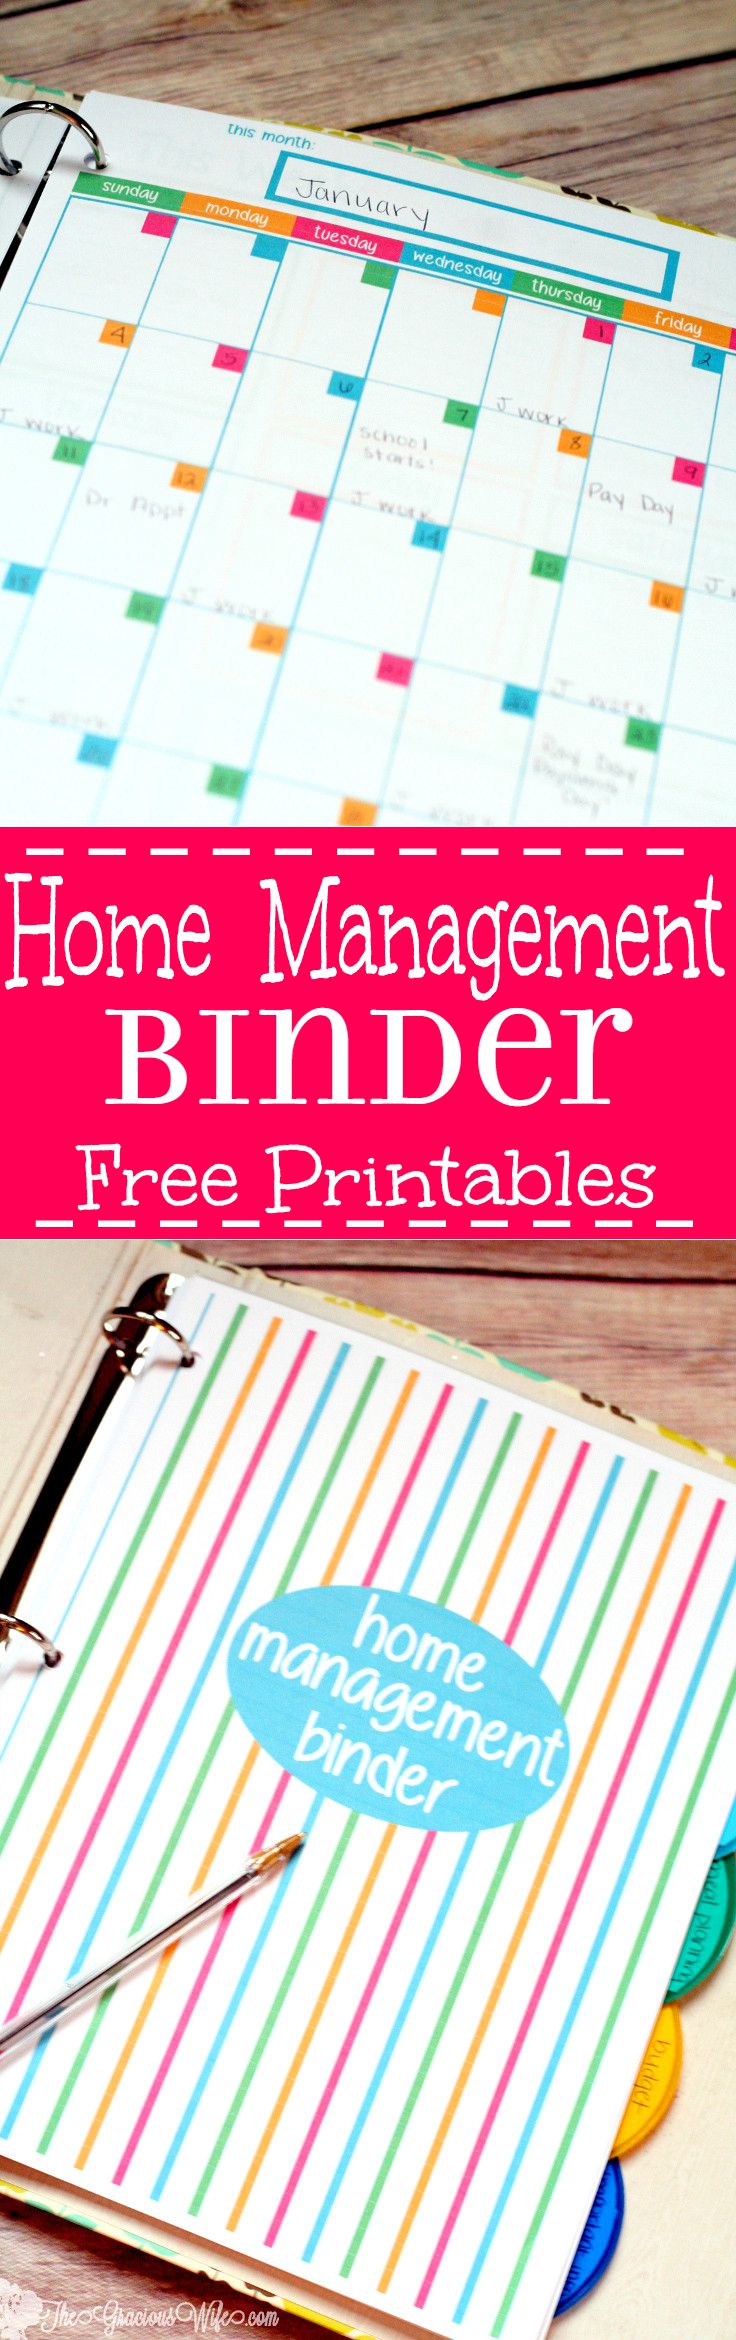 home-management-binder-free-printables-the-gracious-wife